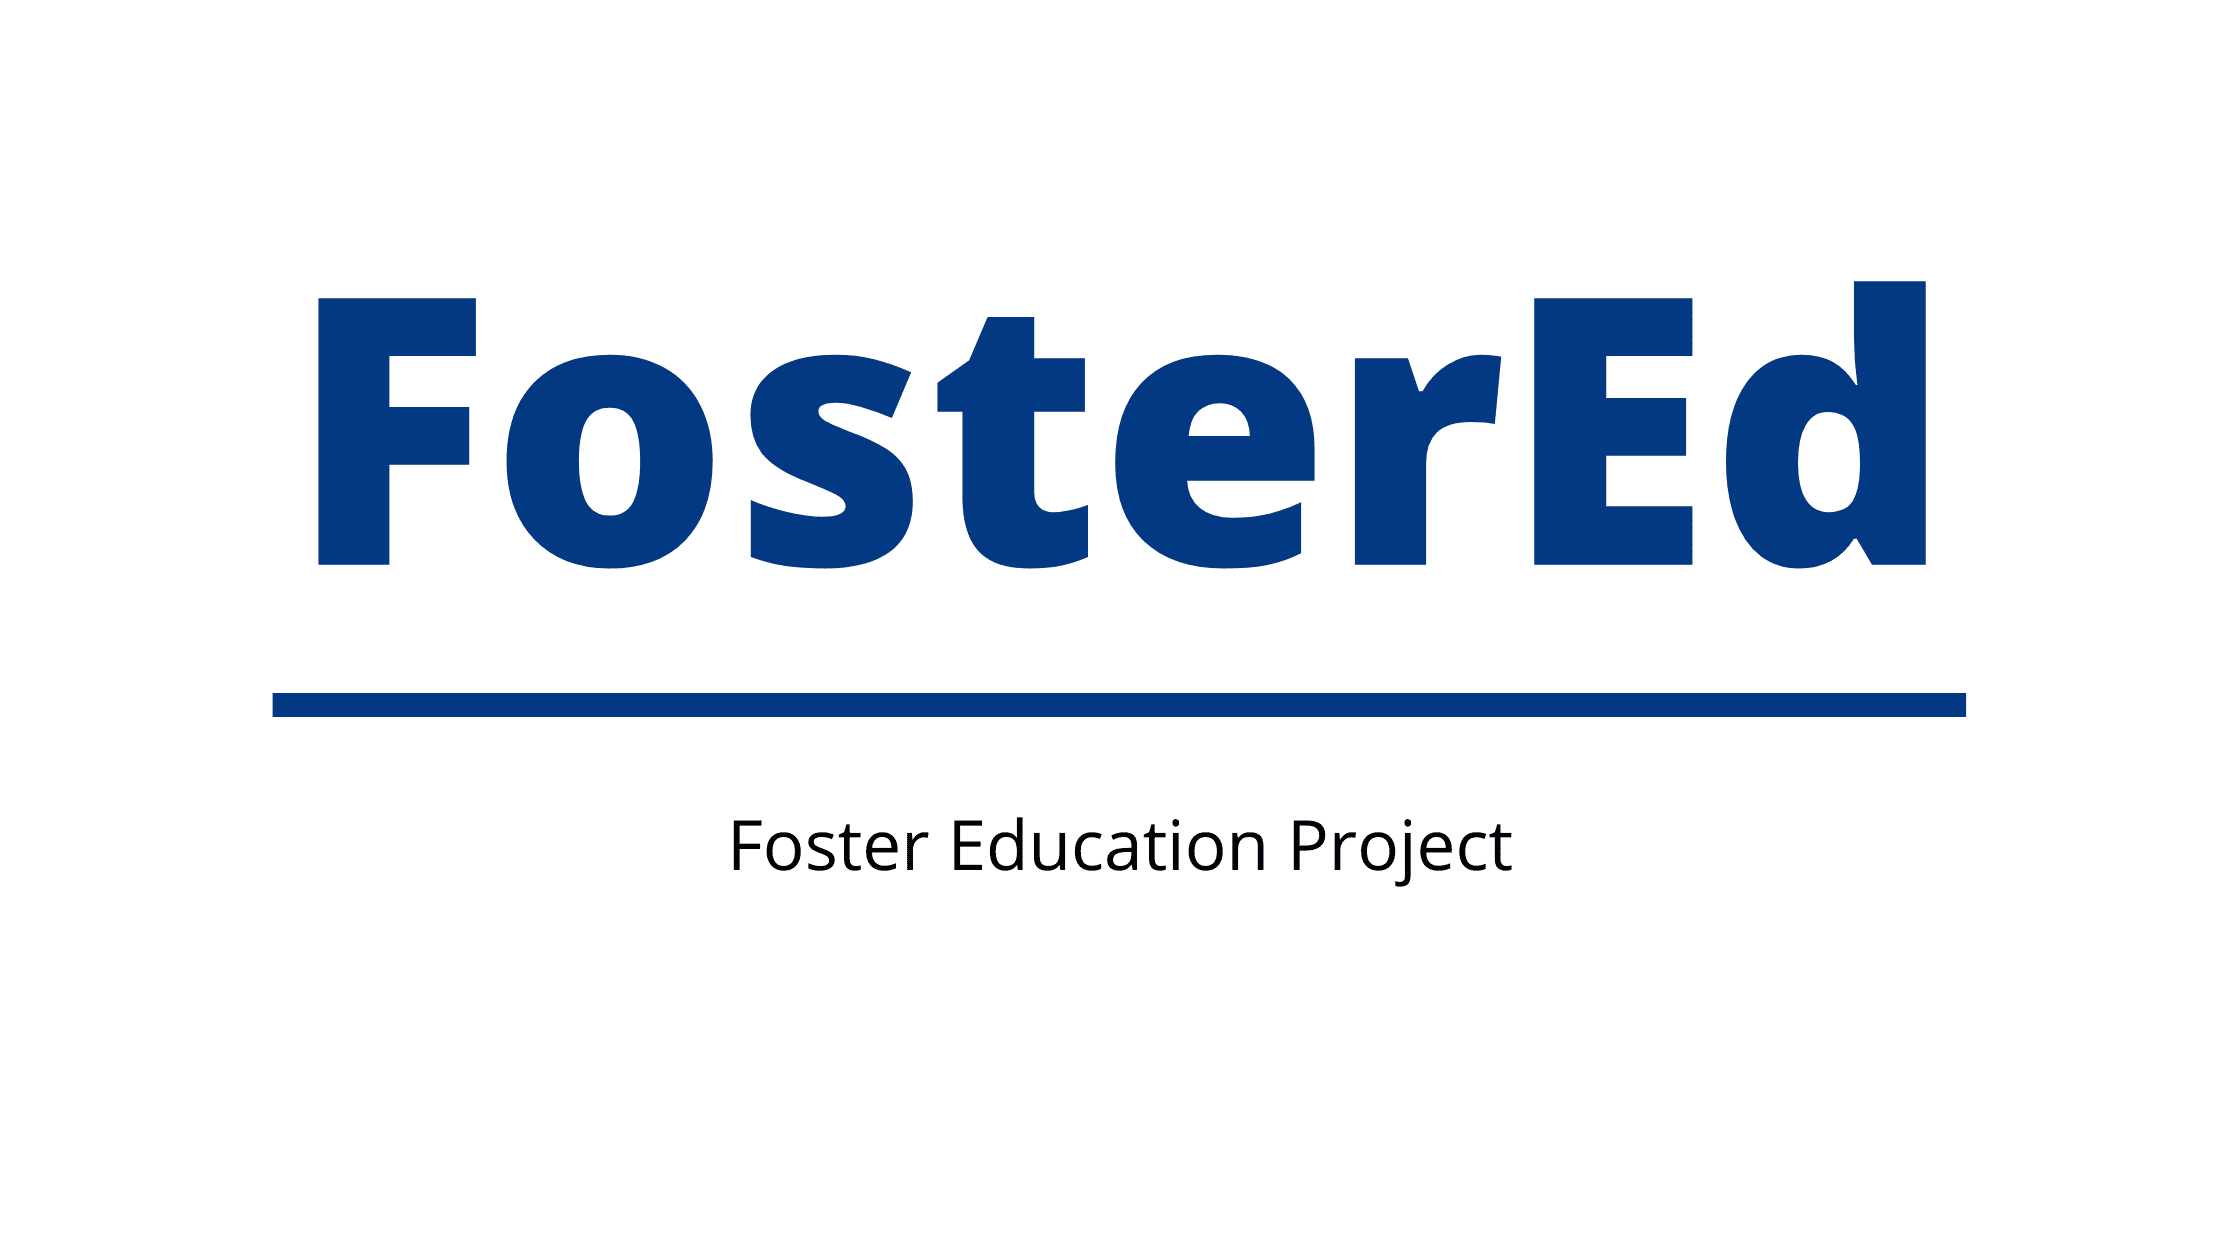 FosterEd (Foster Education Project) SLP Logo